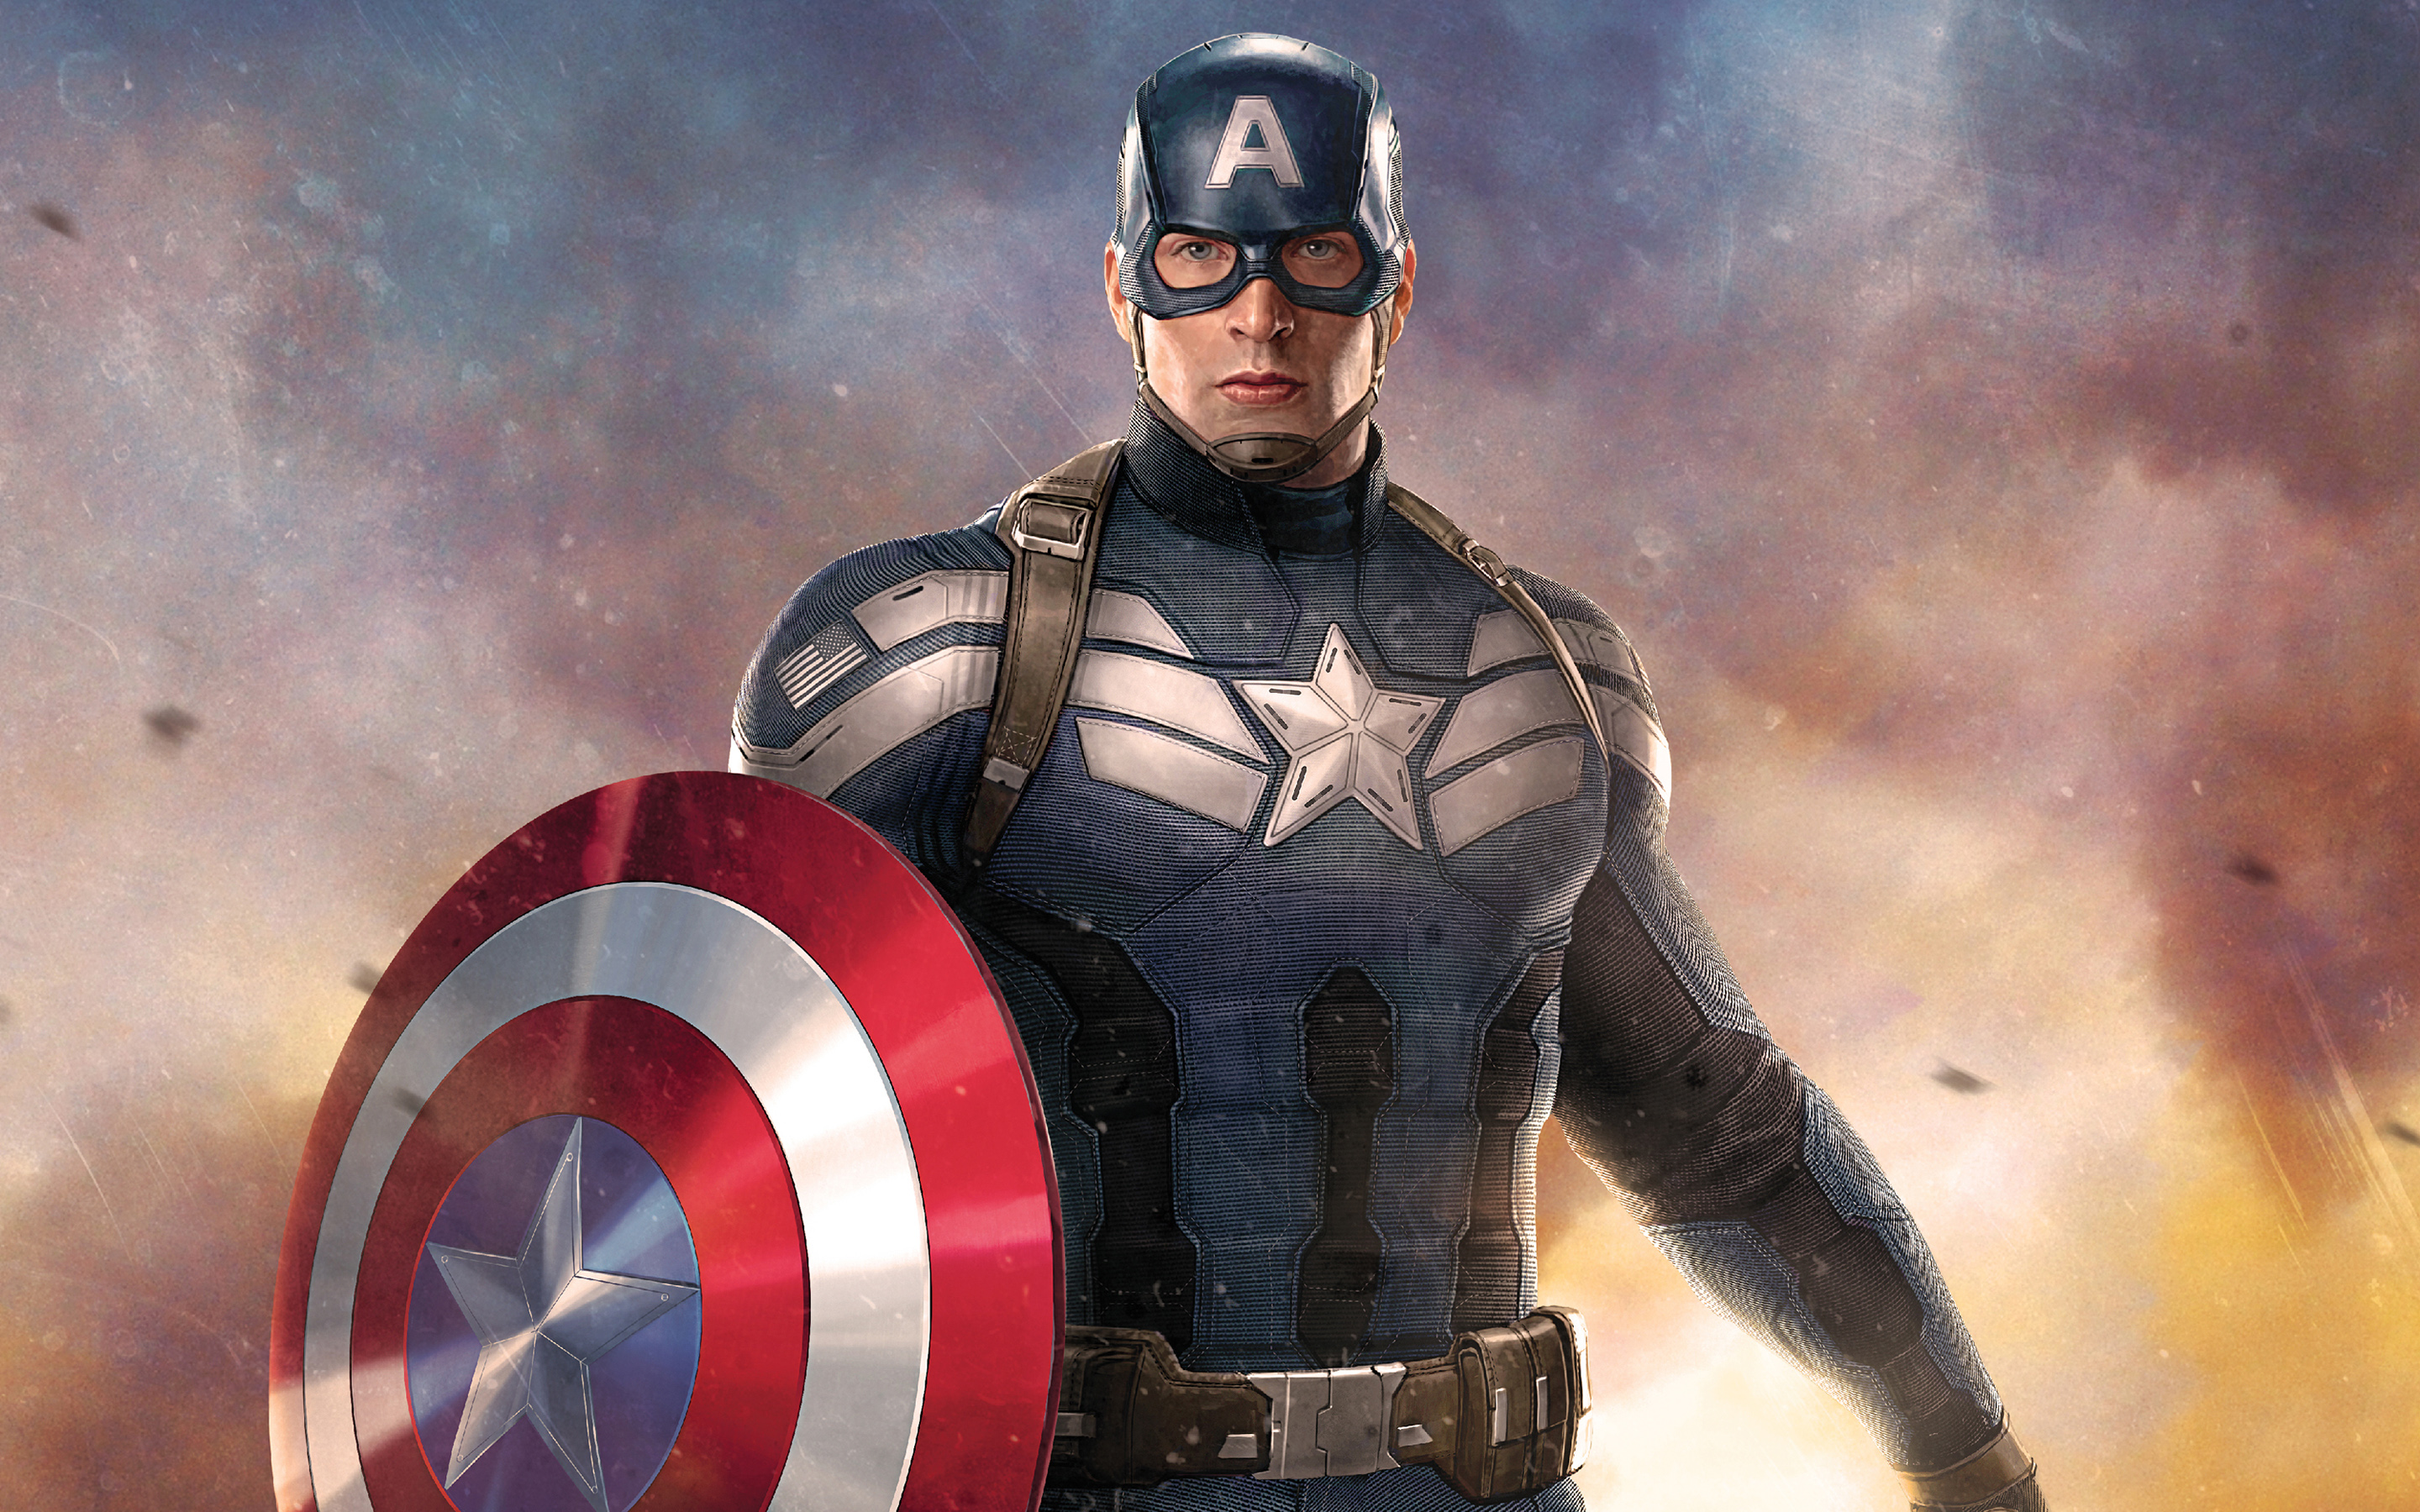 Amazoncom Falcon As Captain America 4k Wallpaper The Falcon and The  Winter Soldier Wallpapers Capitan America TV Show 4K Wallpaper Capitan  America Print Art  Handmade Products